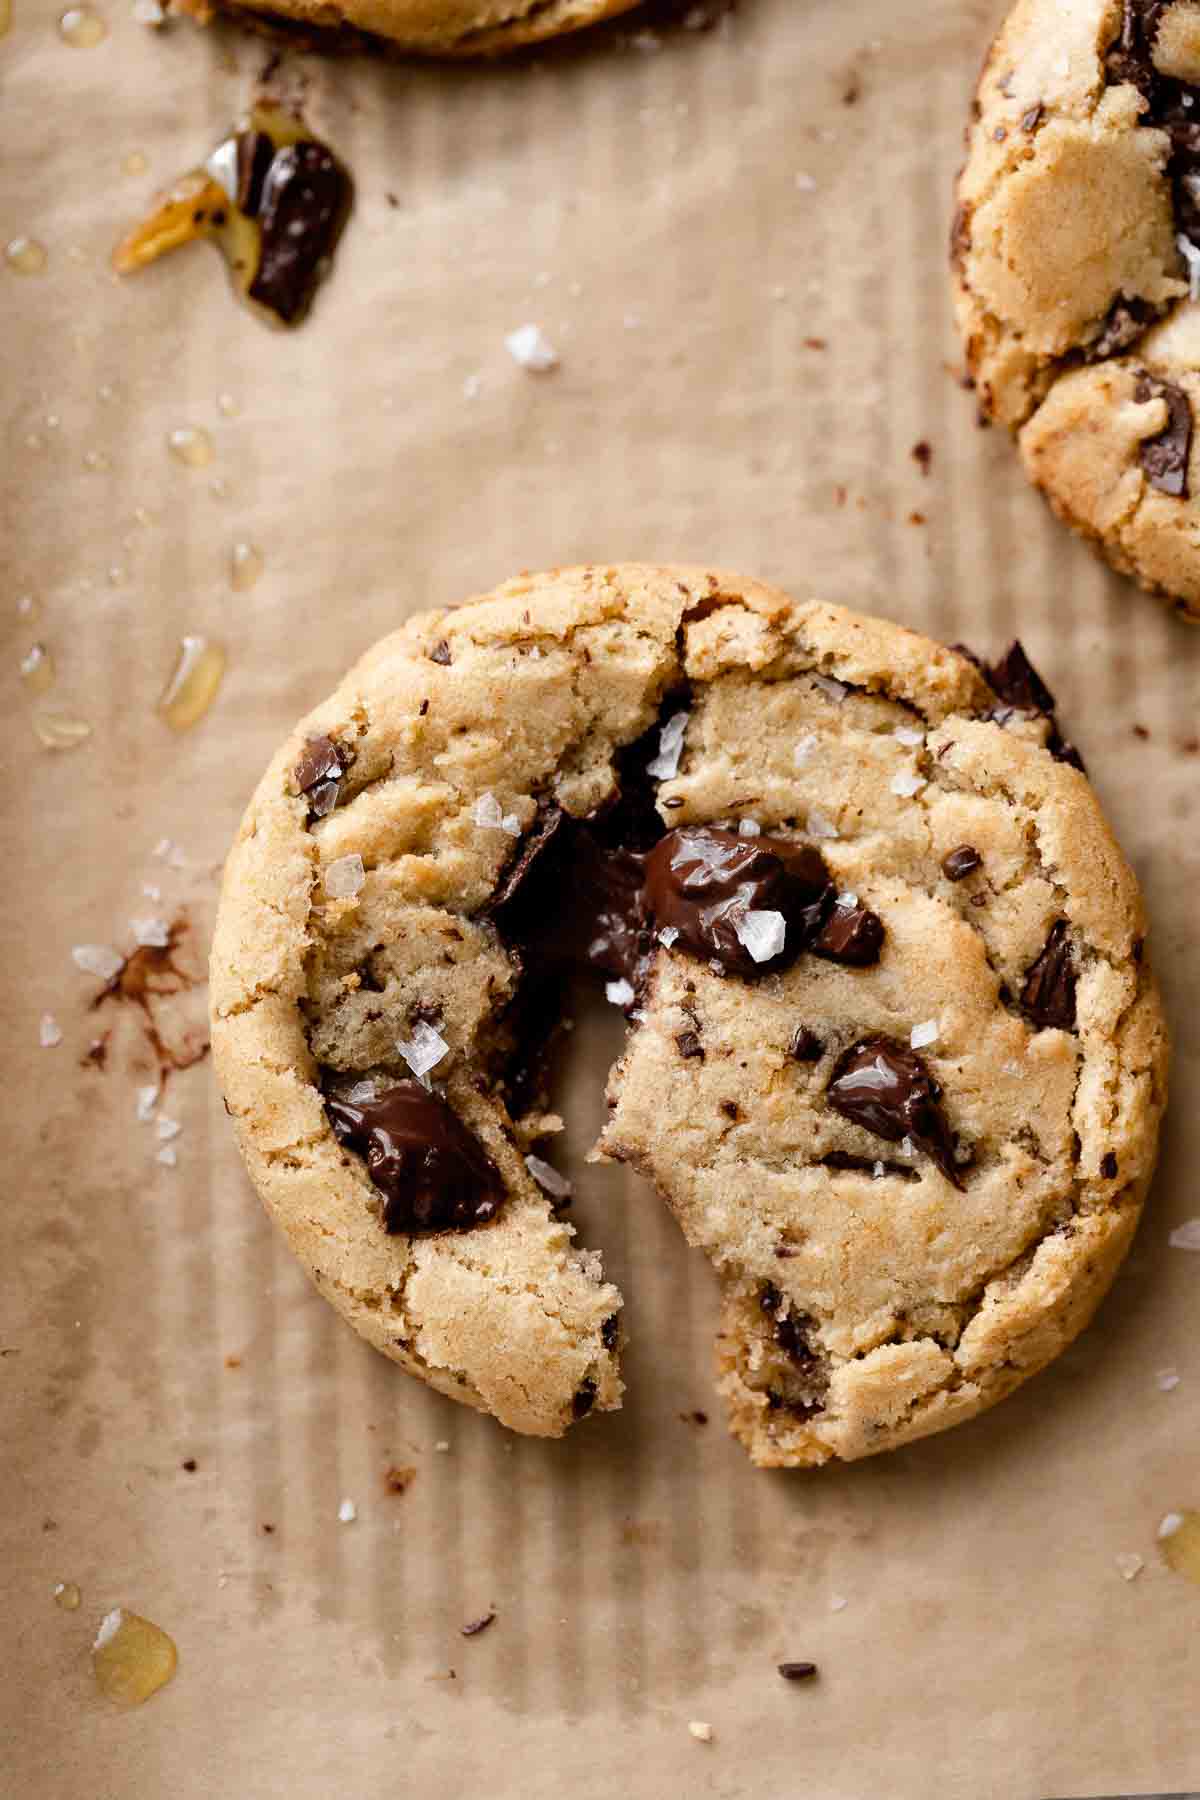 a chocolate chip olive oil cookie broken in half.